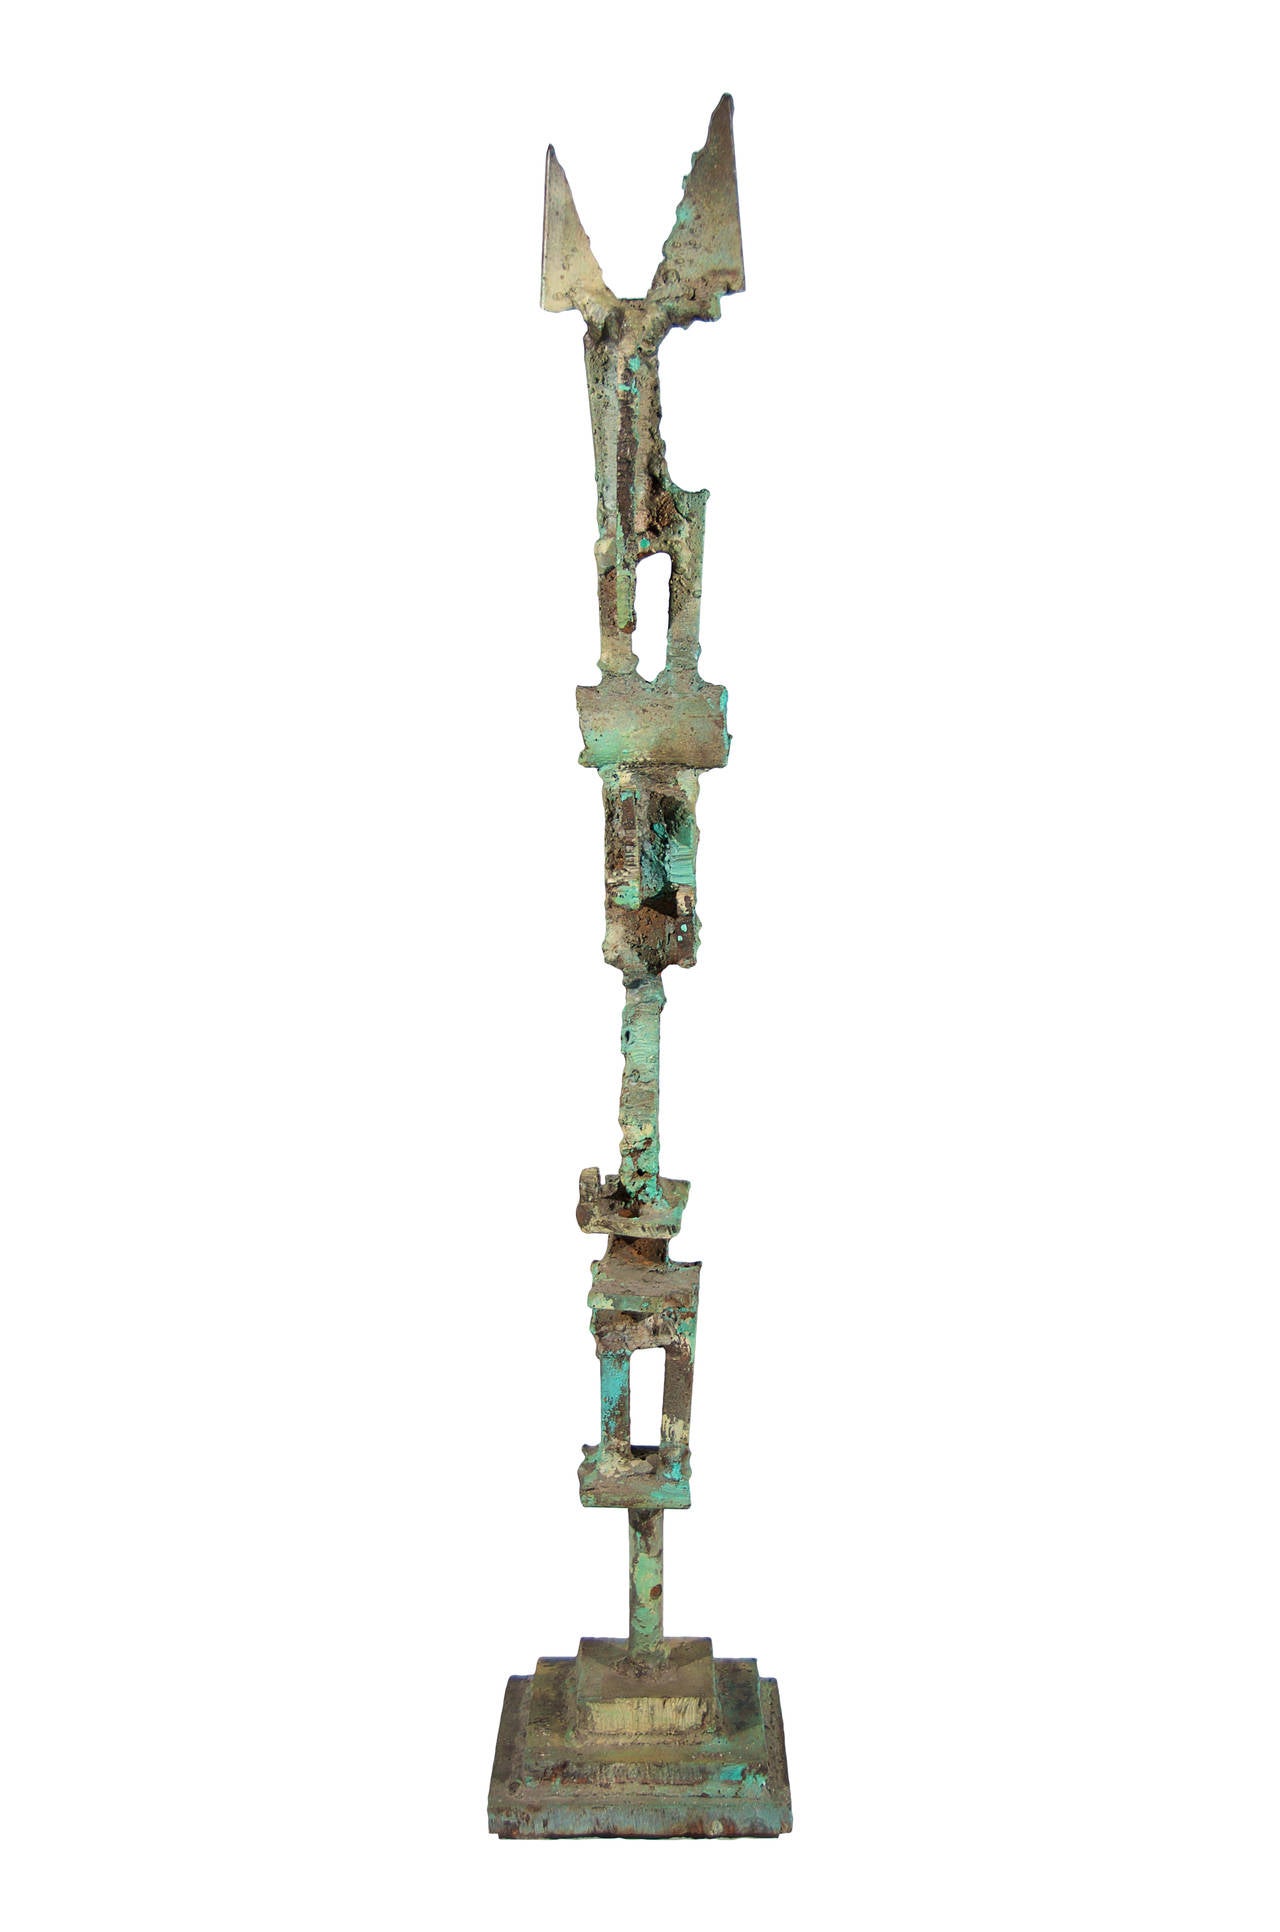 Metal sculpture in the Brutalist style with verdigris patina, signed on base 